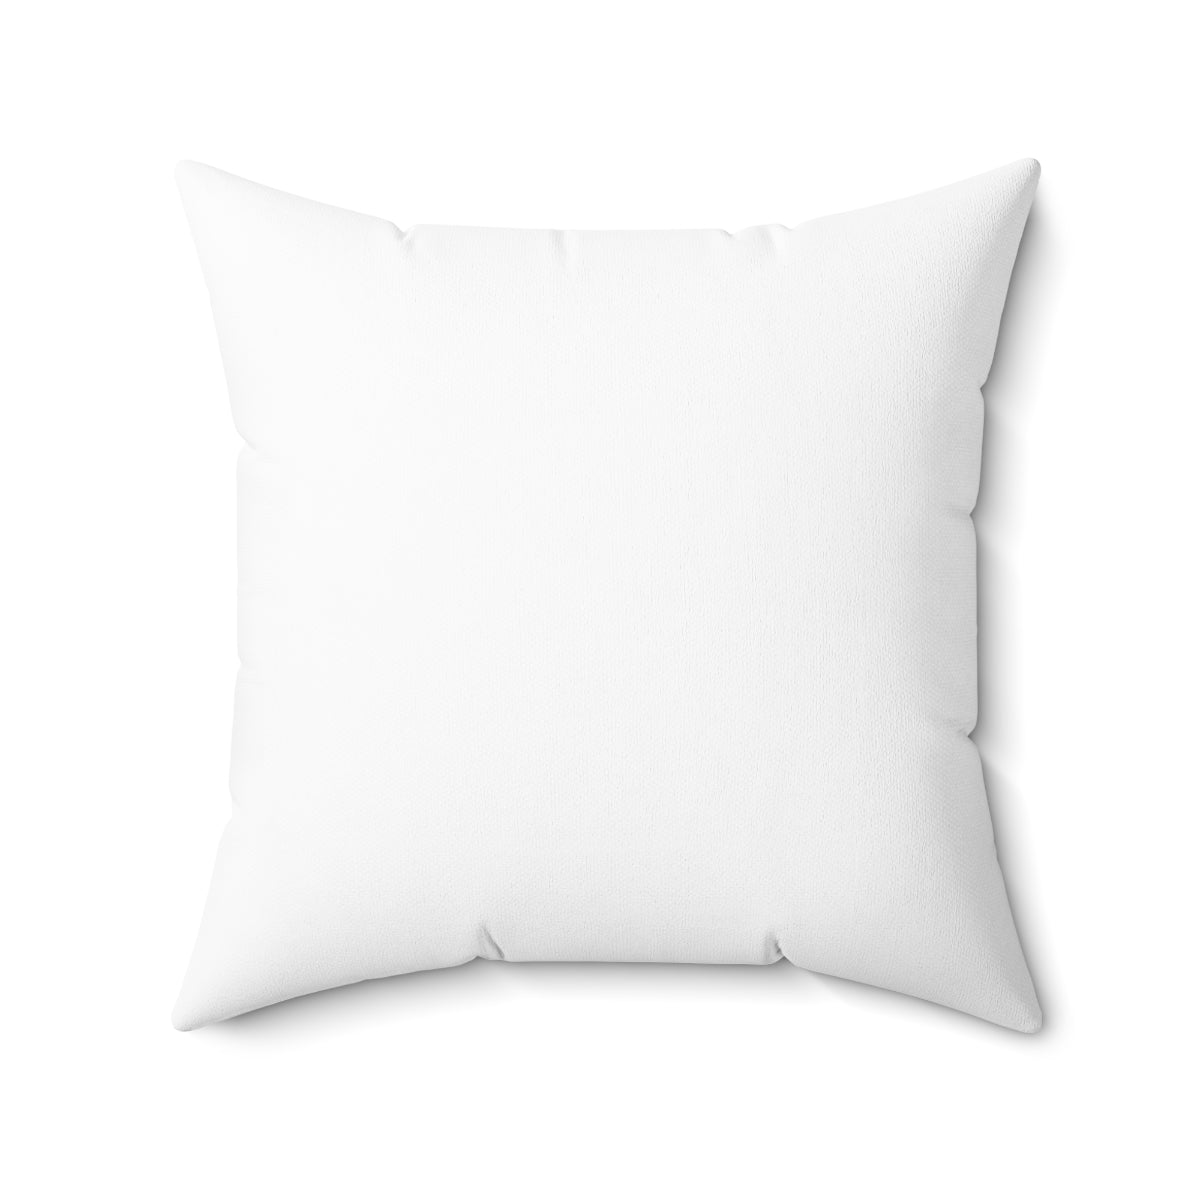 Bee-lieve Spun Polyester Square Pillow Case